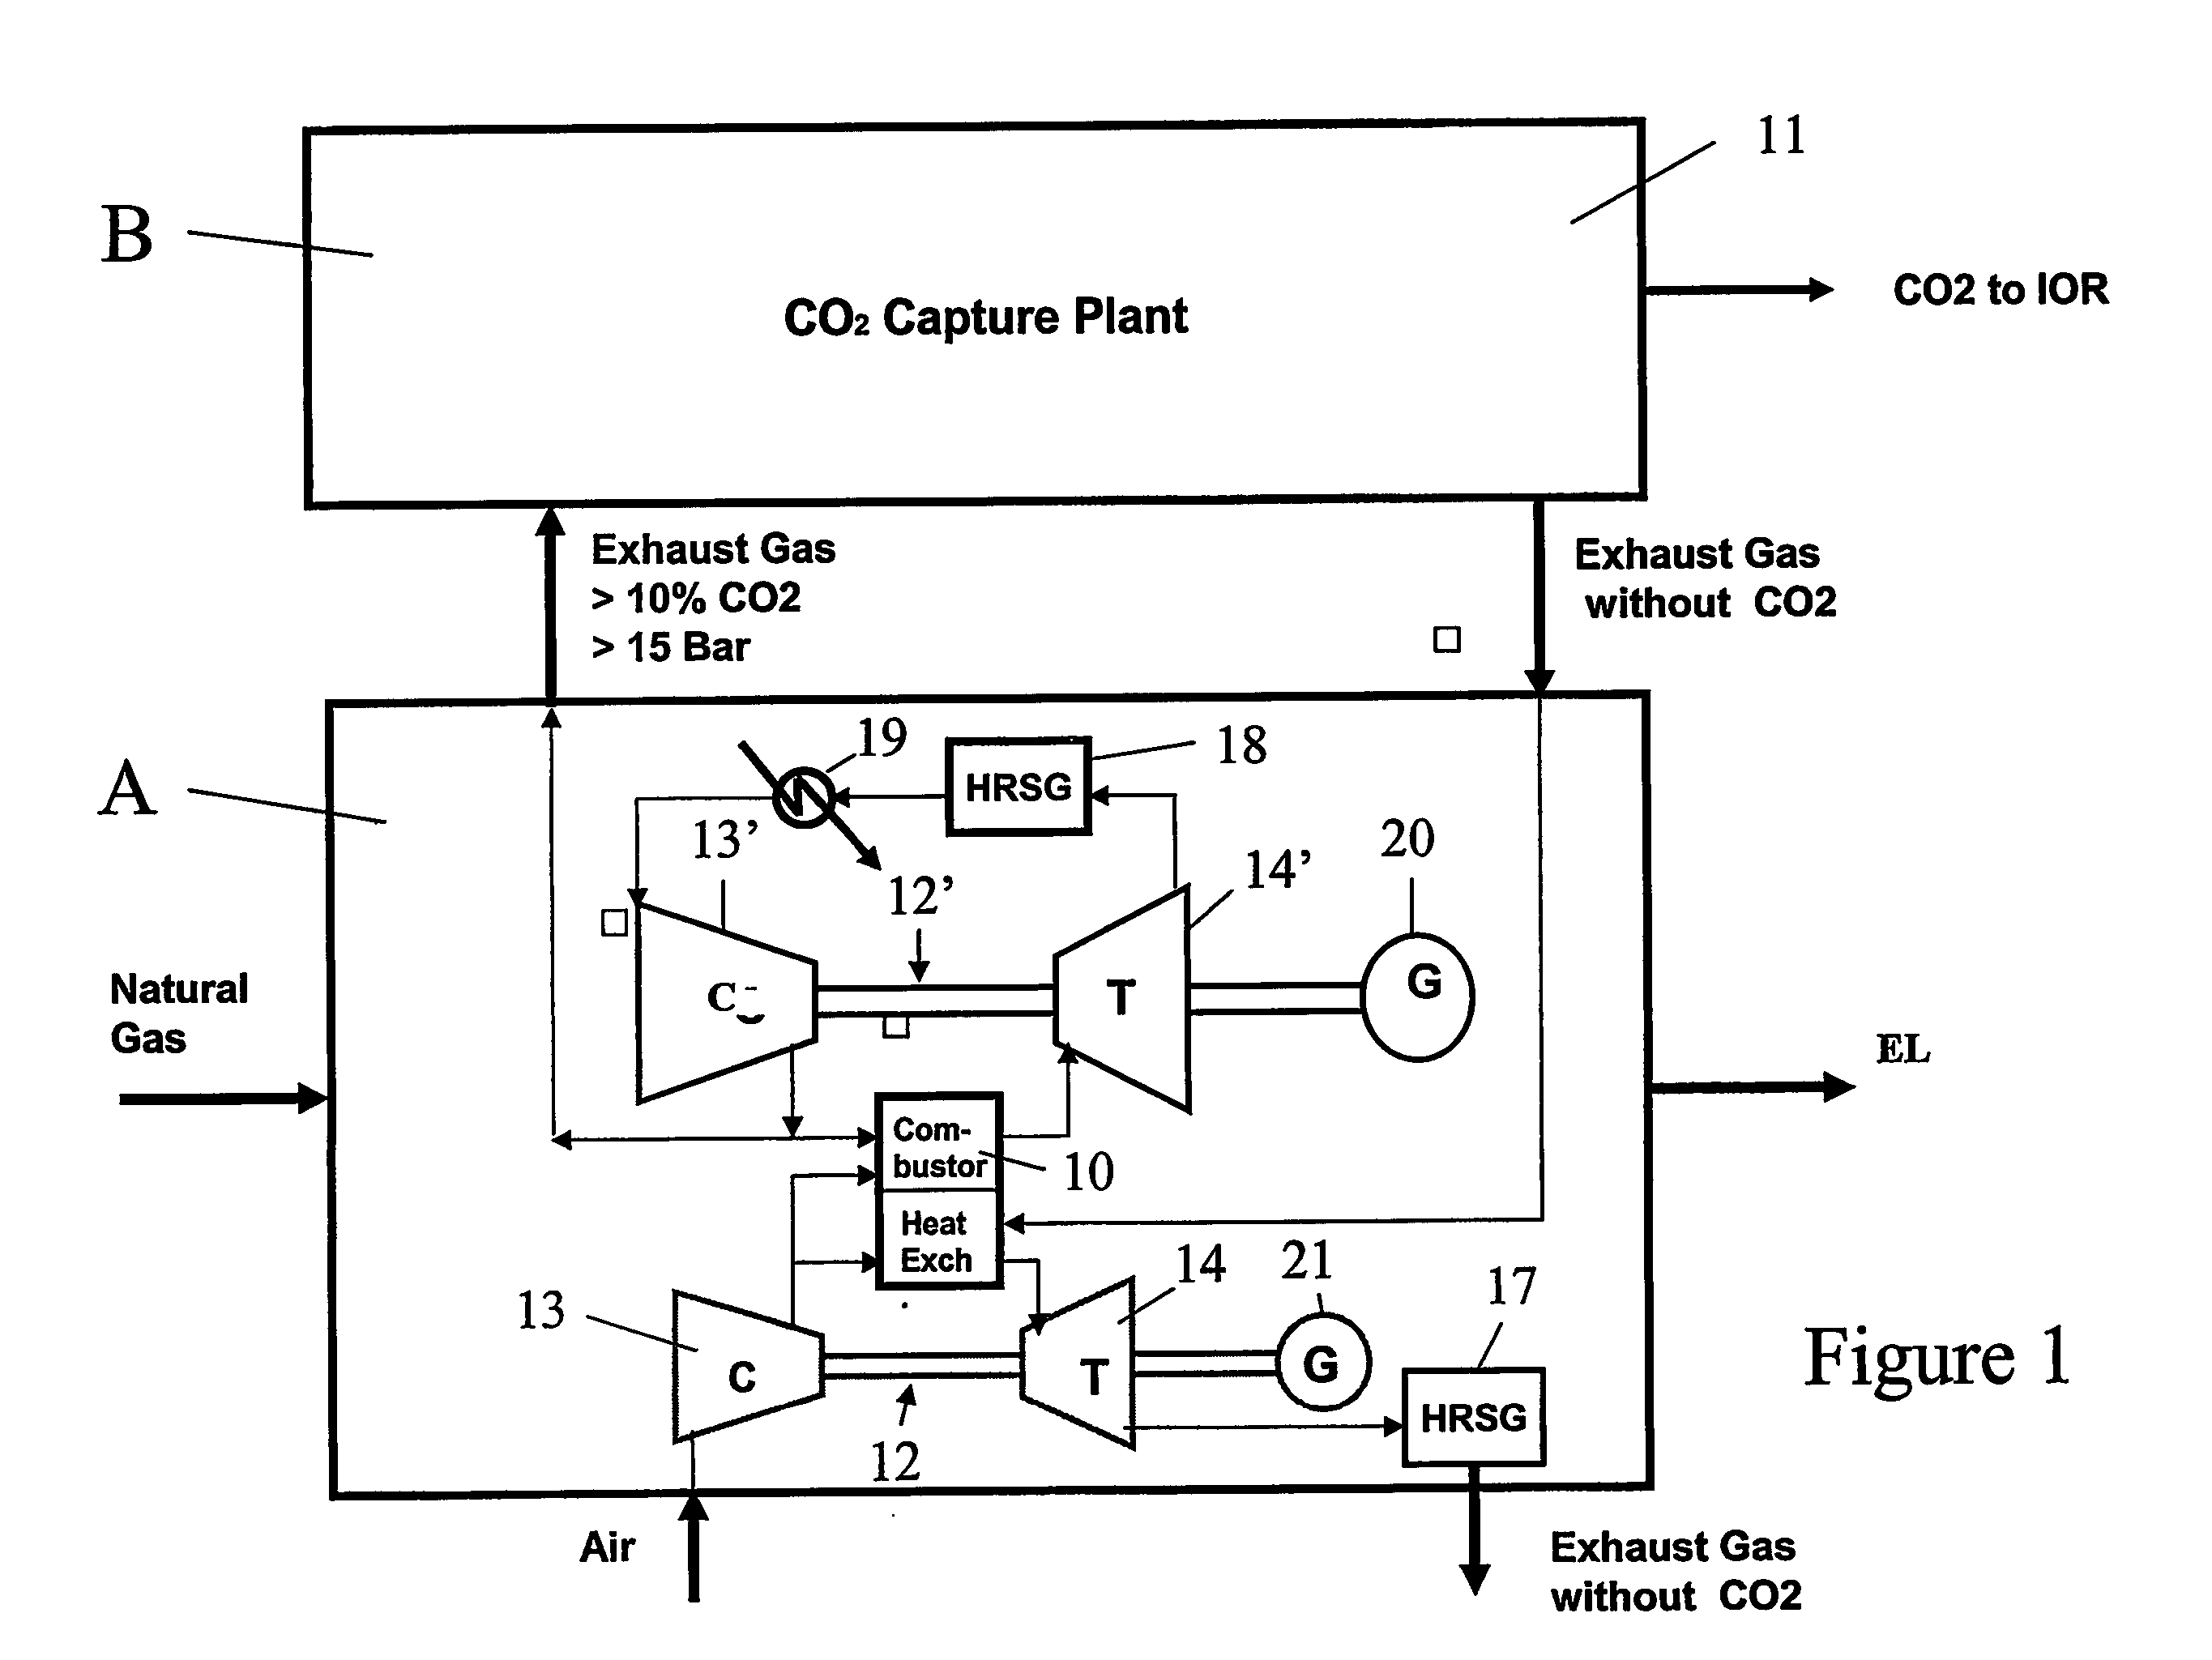 Efficient combined cycle power plant with co2 capture and a combustor arrangement with separate flows